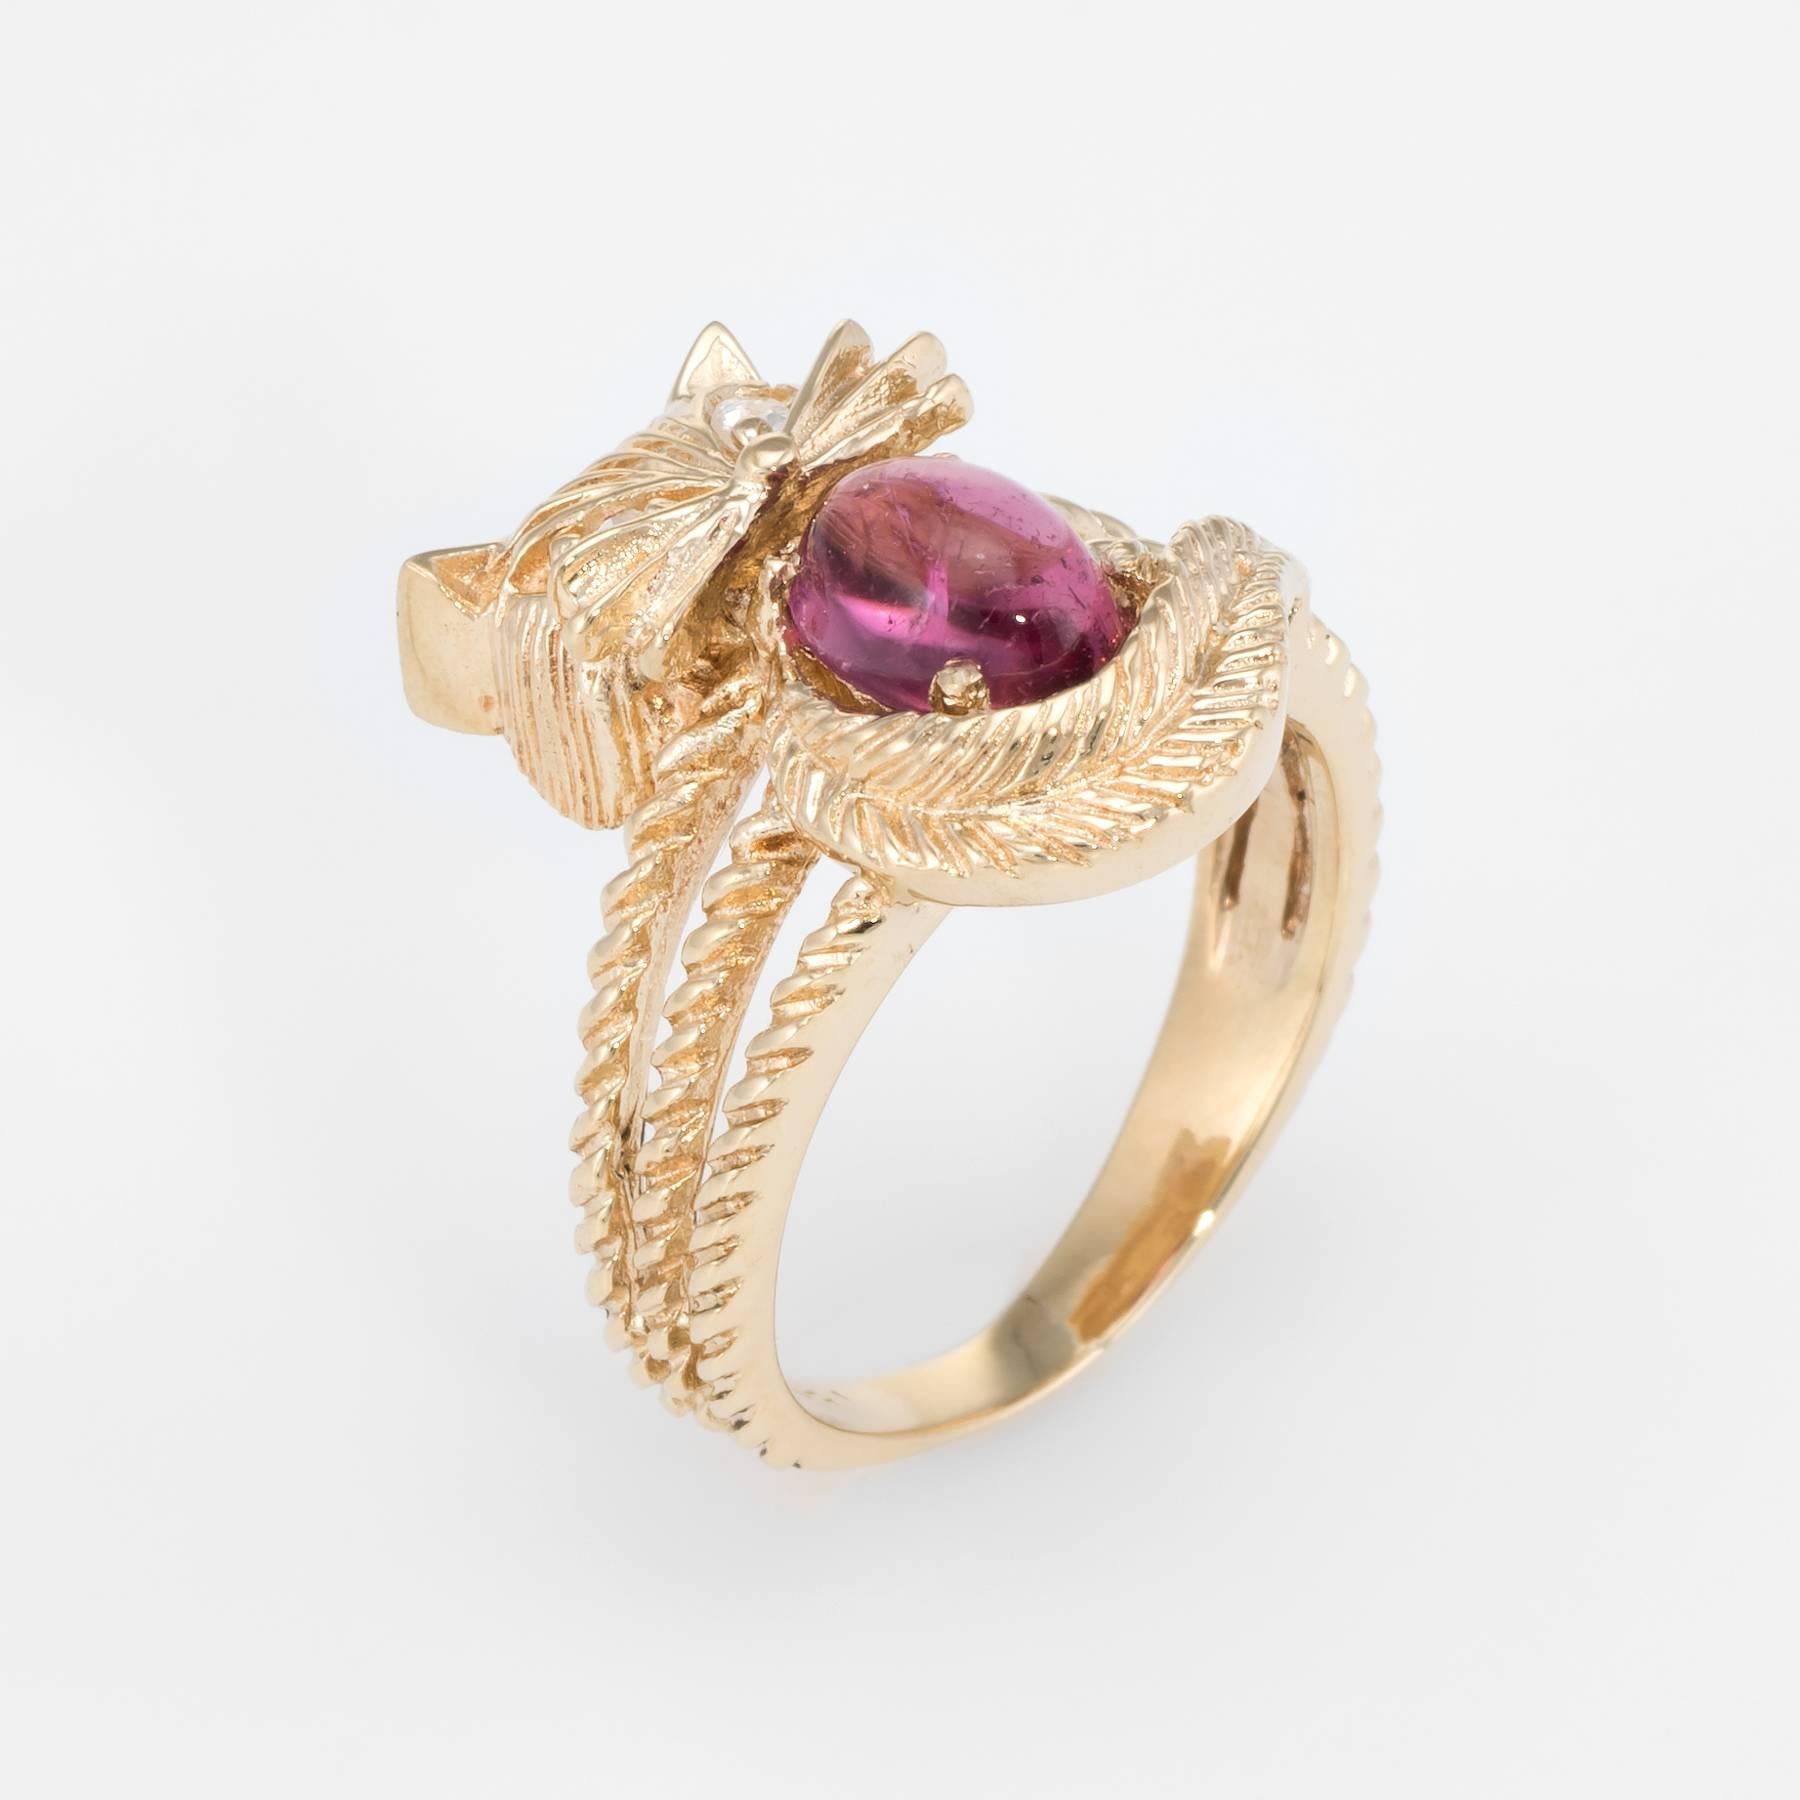 Finely detailed vintage kitty cat ring, crafted in 14 karat yellow gold. 

Oval cabochon cut pink tourmaline measures 6.5mm x 5mm (estimated at 1.50 carats), accented with an estimated 0.02 carats of single cut diamonds (estimated at H color and